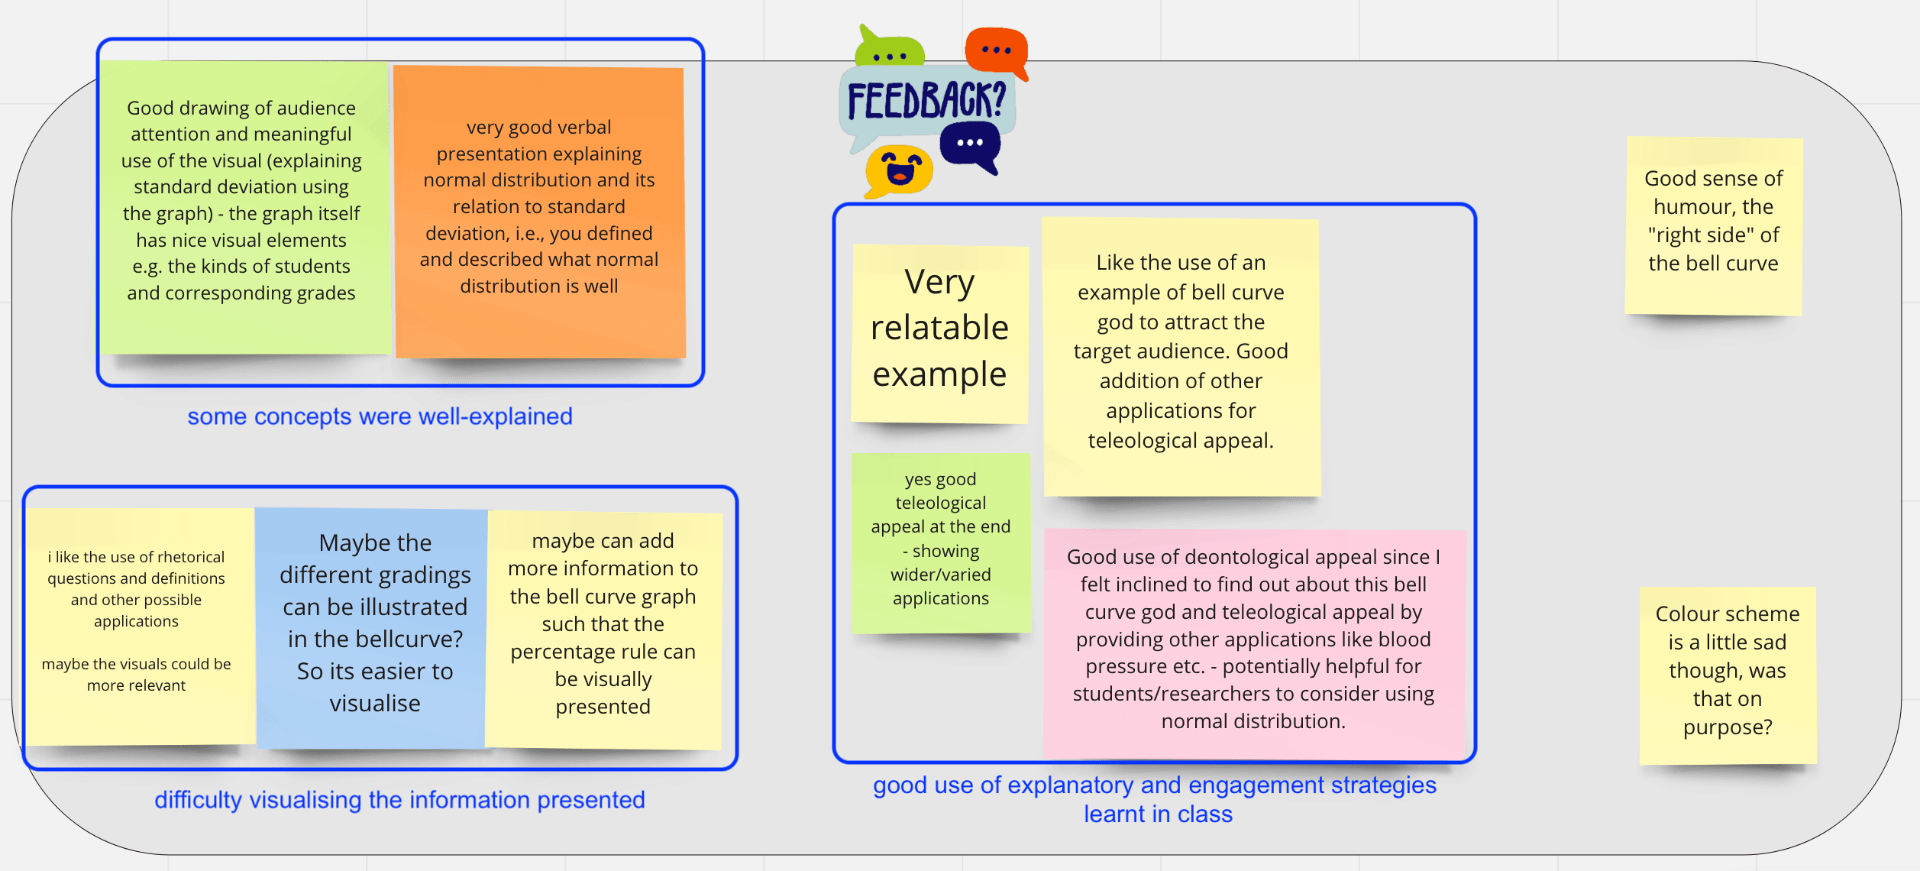 Peer feedback on an infographic presentation organised by theme